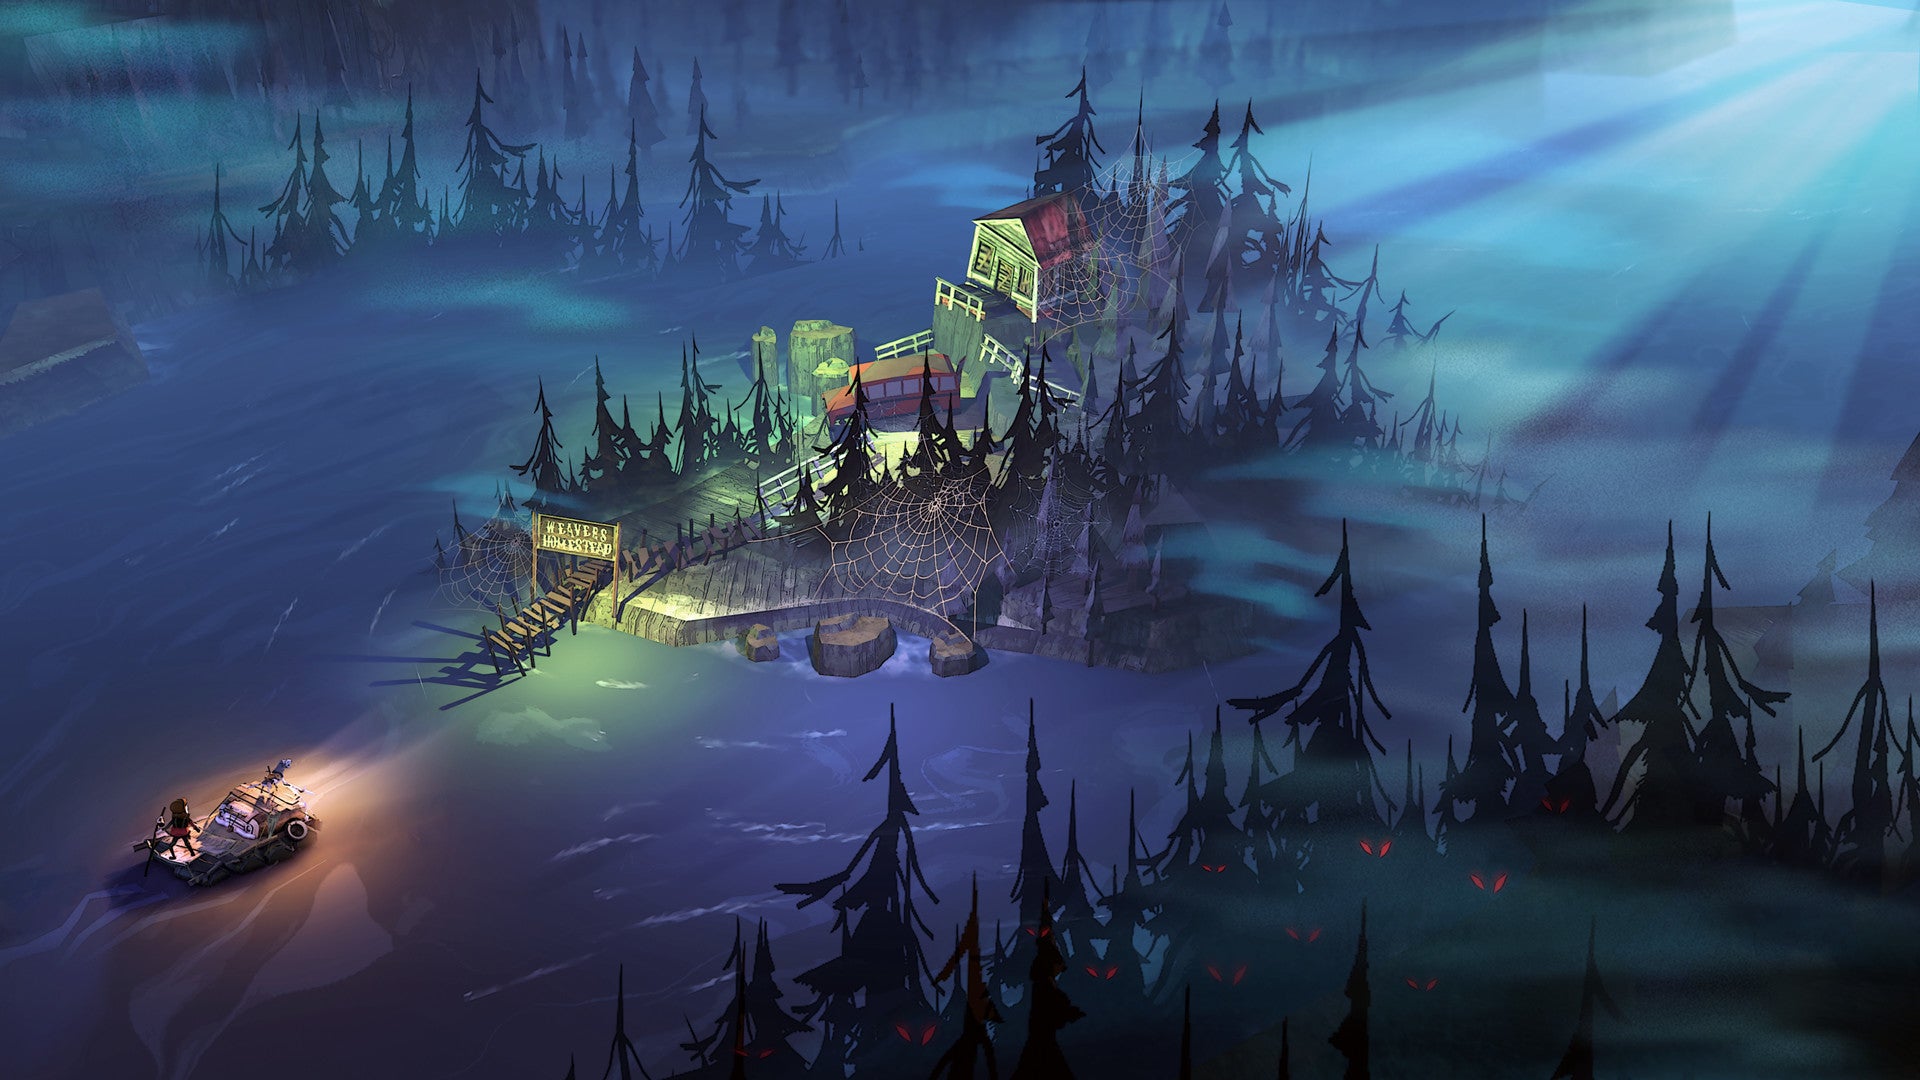 Rafting past a spooky island in a The Flame In The Flood screenshot.